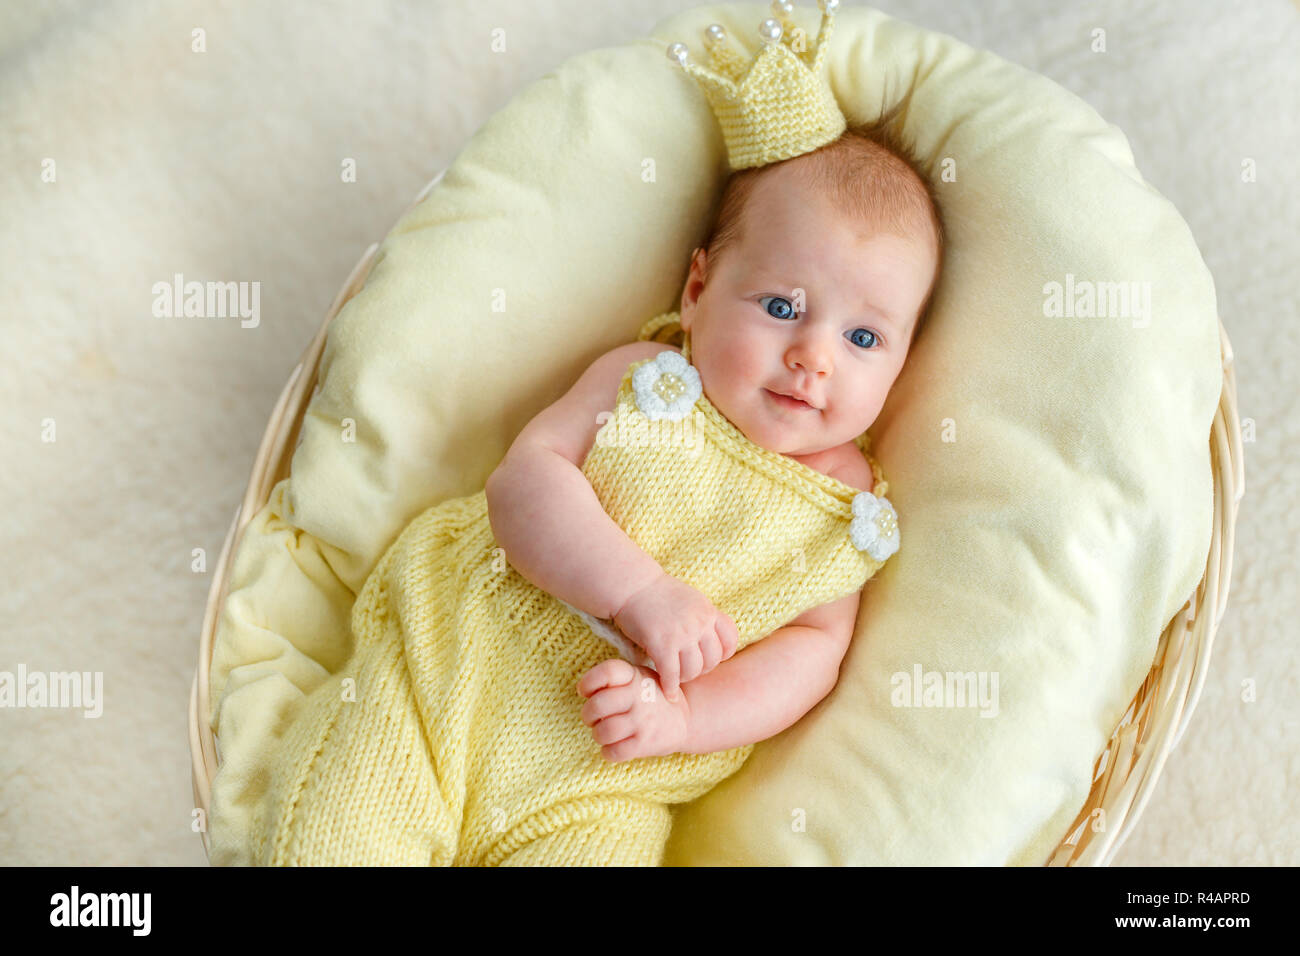 Newborn baby girl lying in a basket with crown and yellow bodysuit Stock Photo